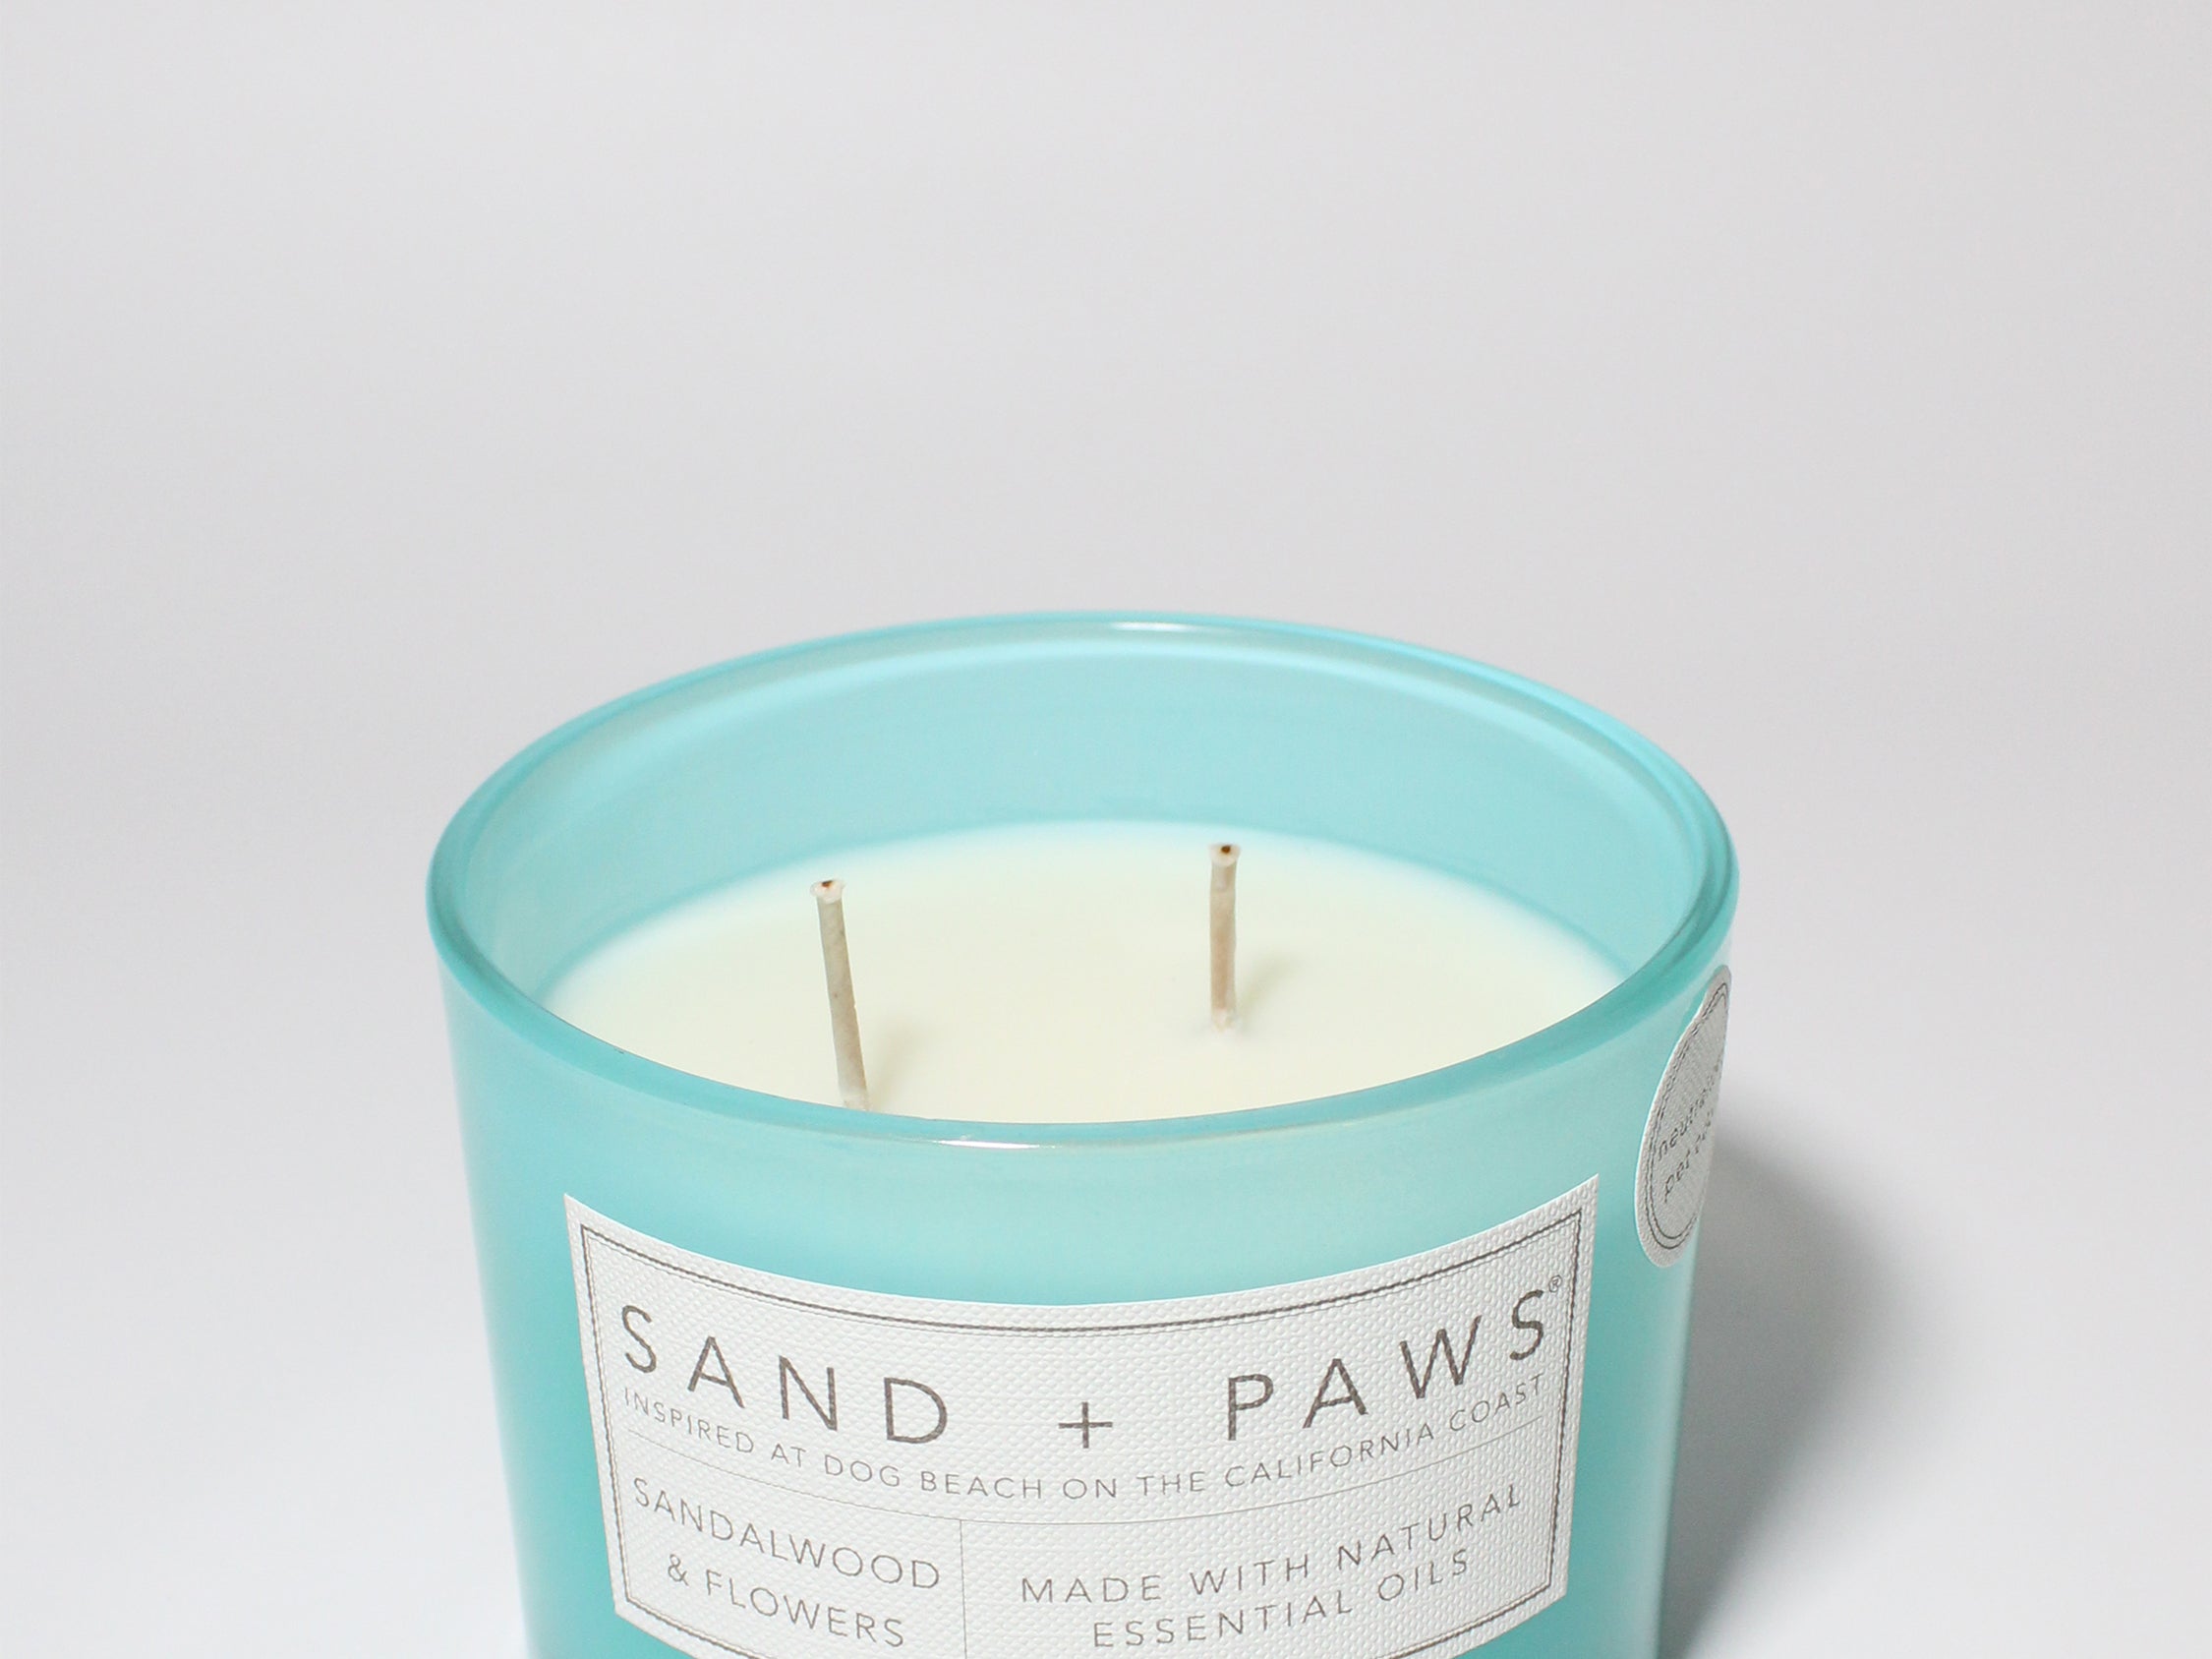 Sand + Paws Sandalwood & Flowers 12 oz scented candle Coast vessel with You had me at Woof Lid